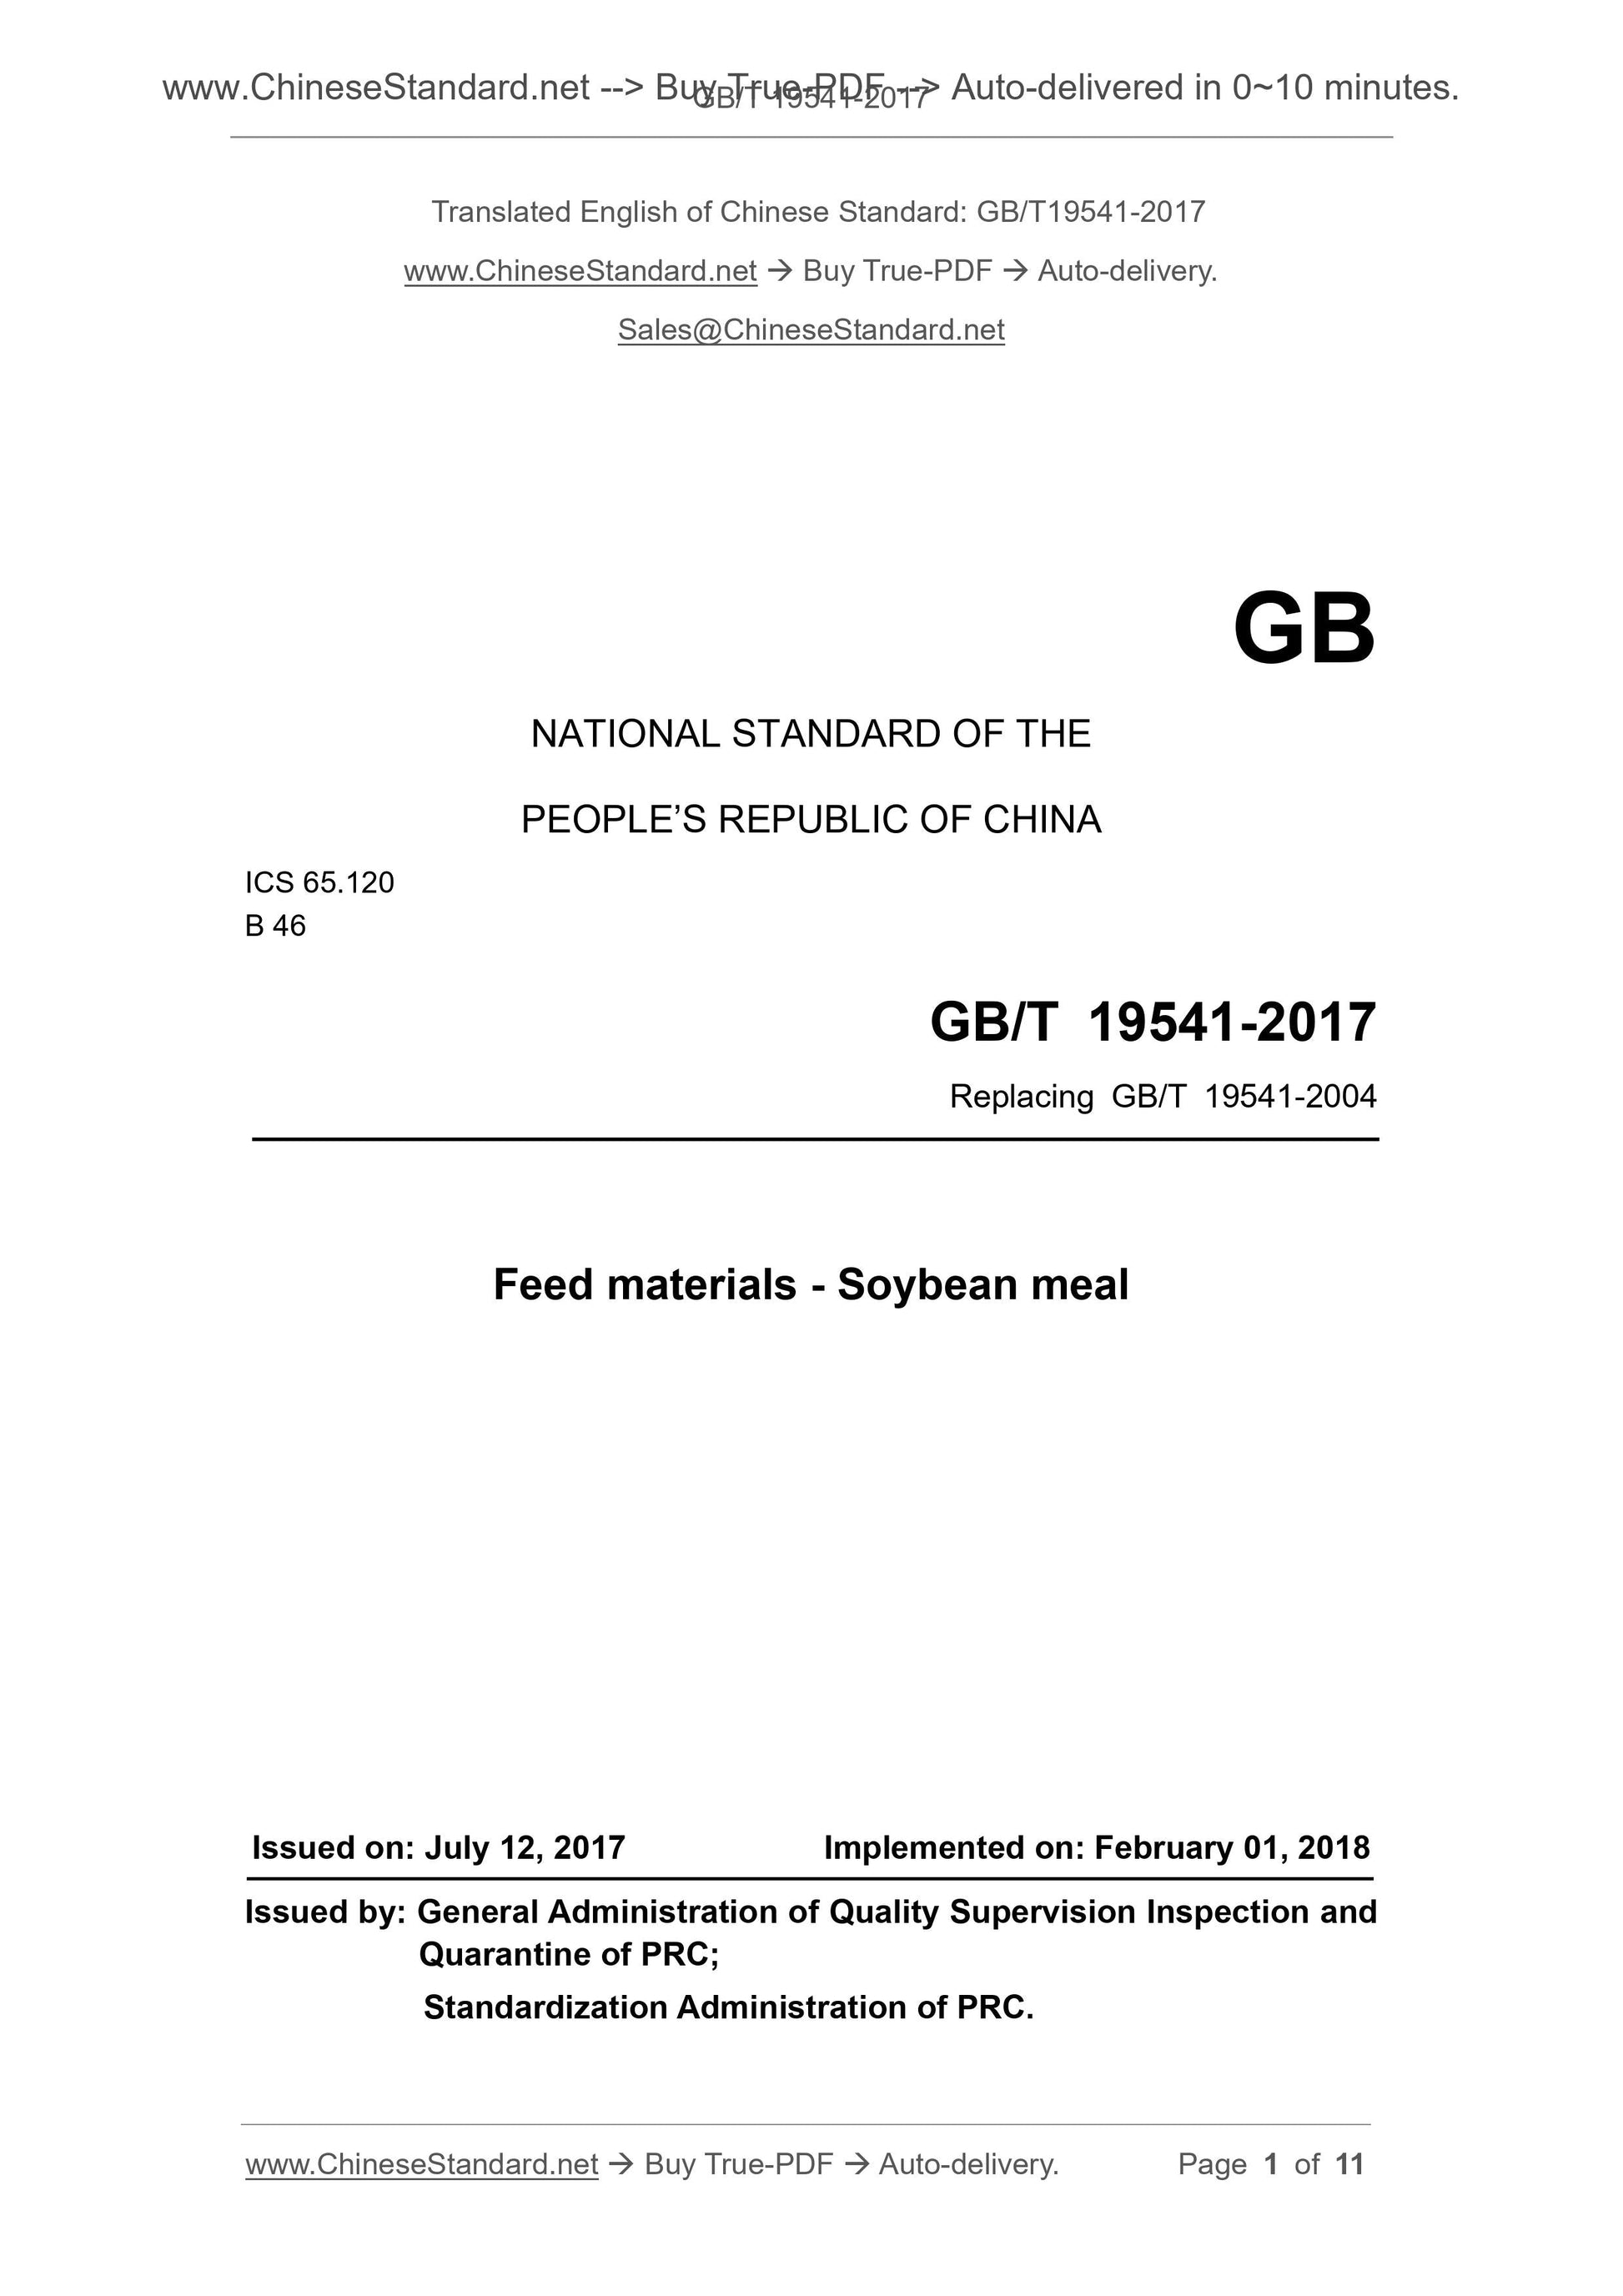 GB/T 19541-2017 Page 1